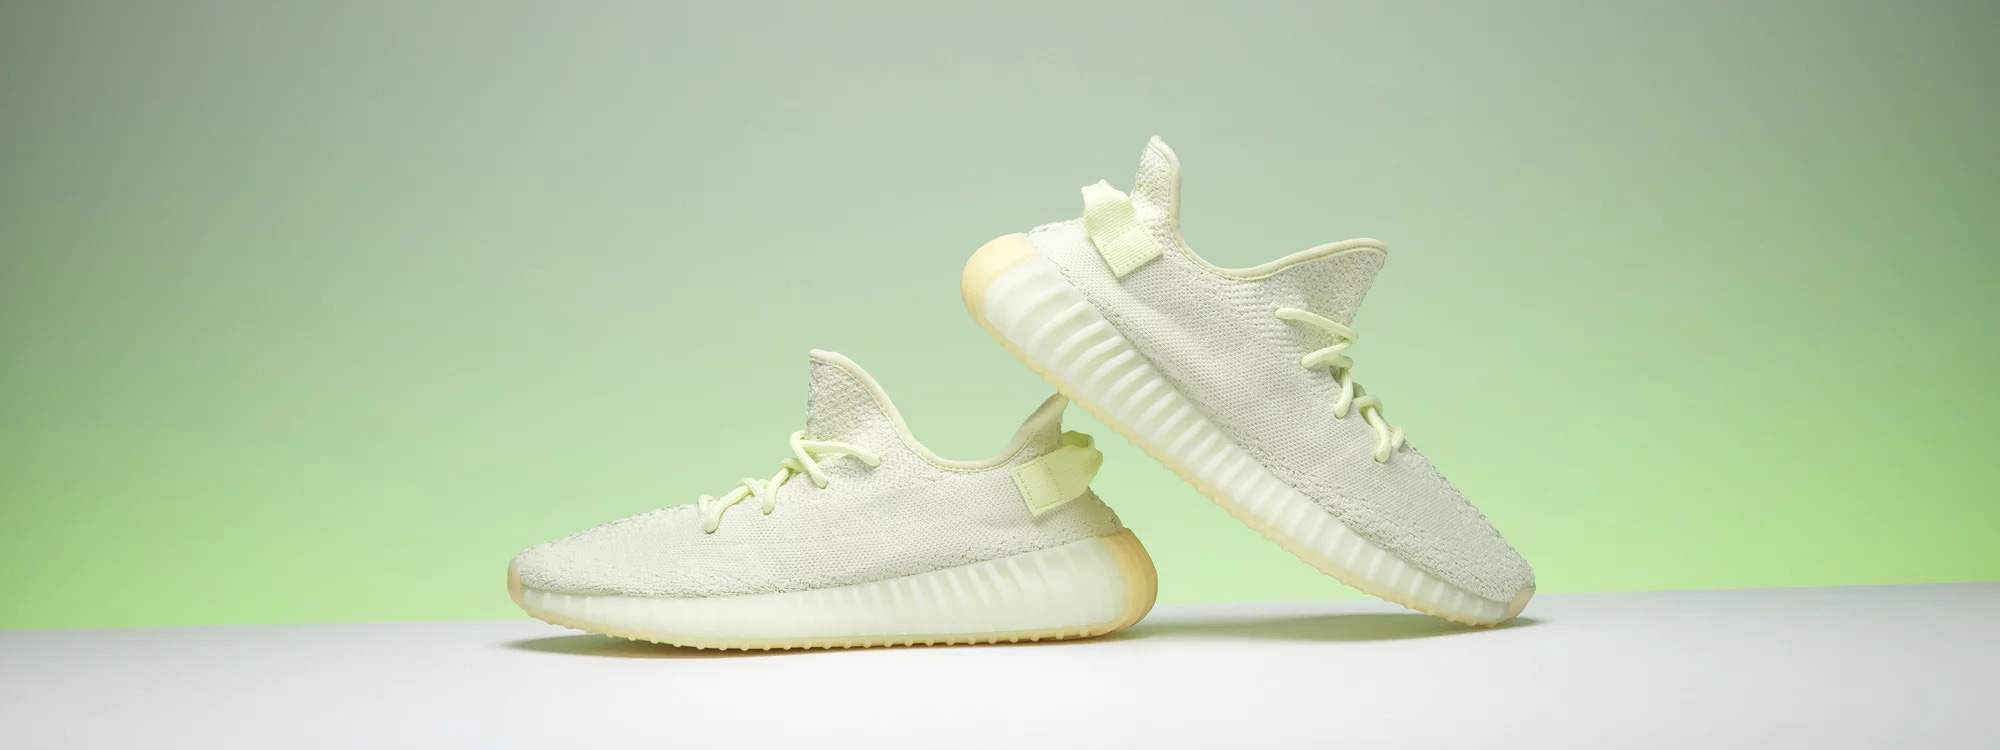 How to get Adidas Yeezy Boost 350 V2 Butter sneakers online